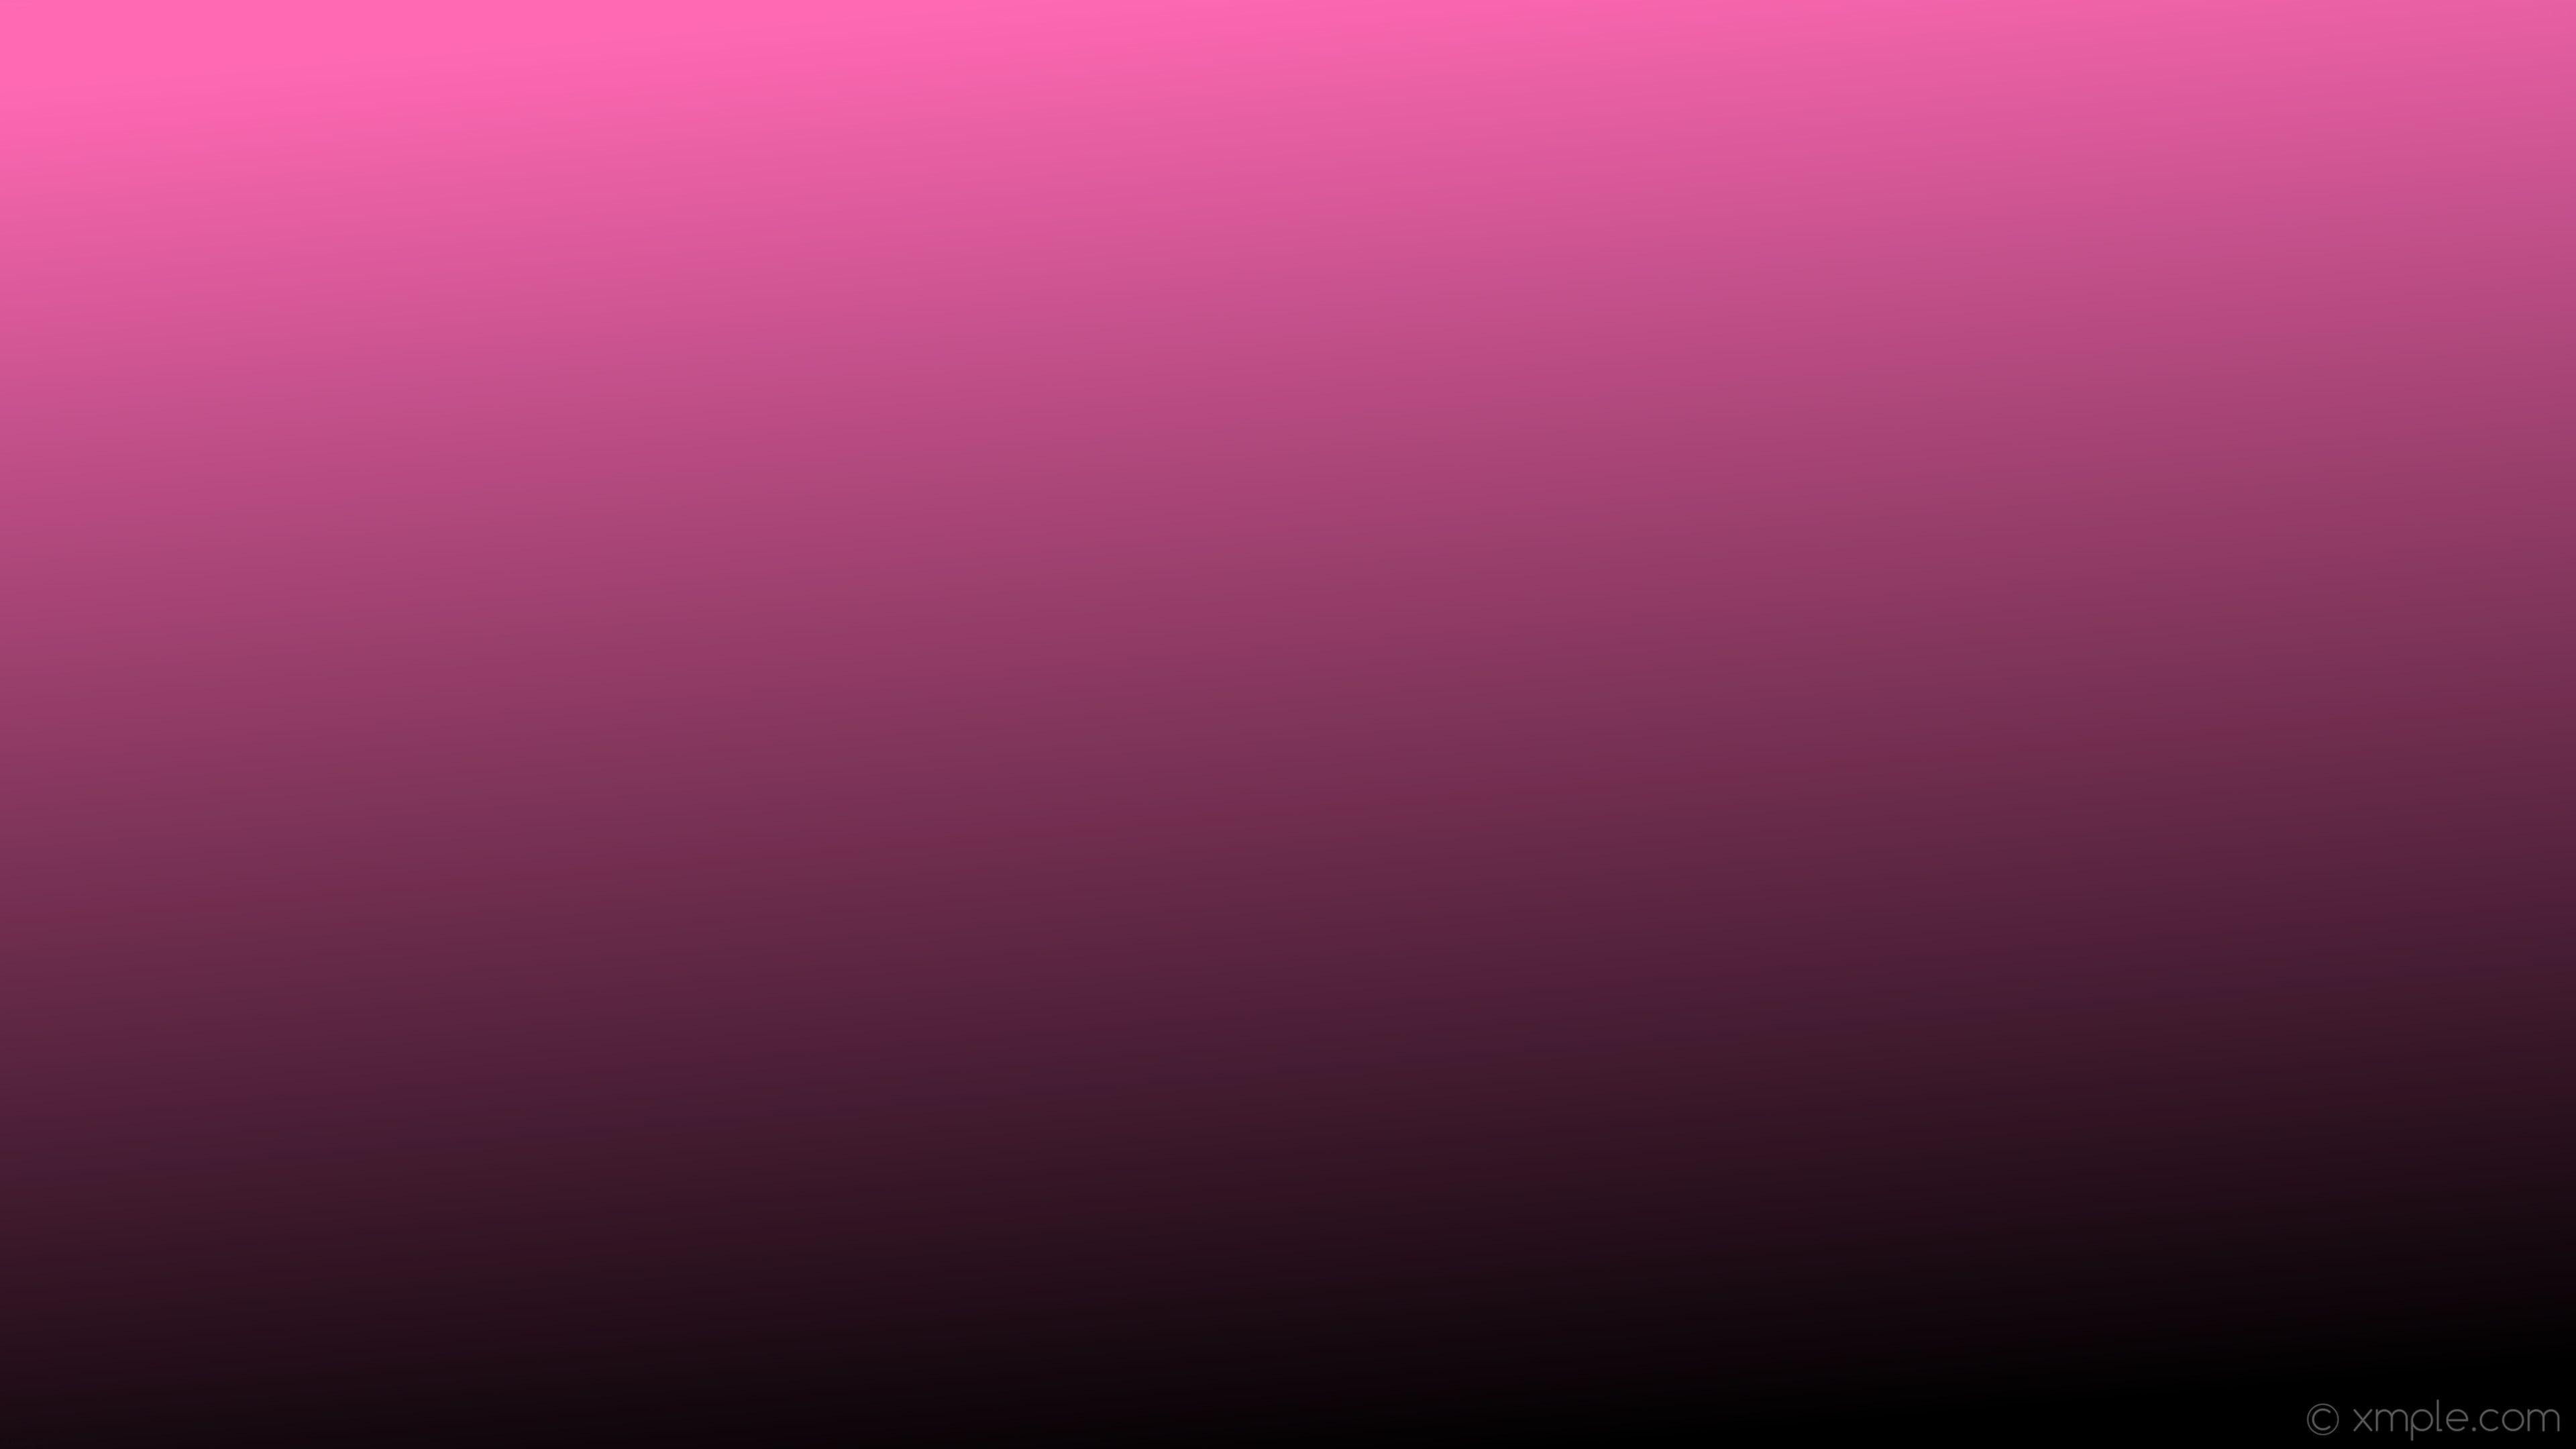 A pink and purple gradient background - Hot pink